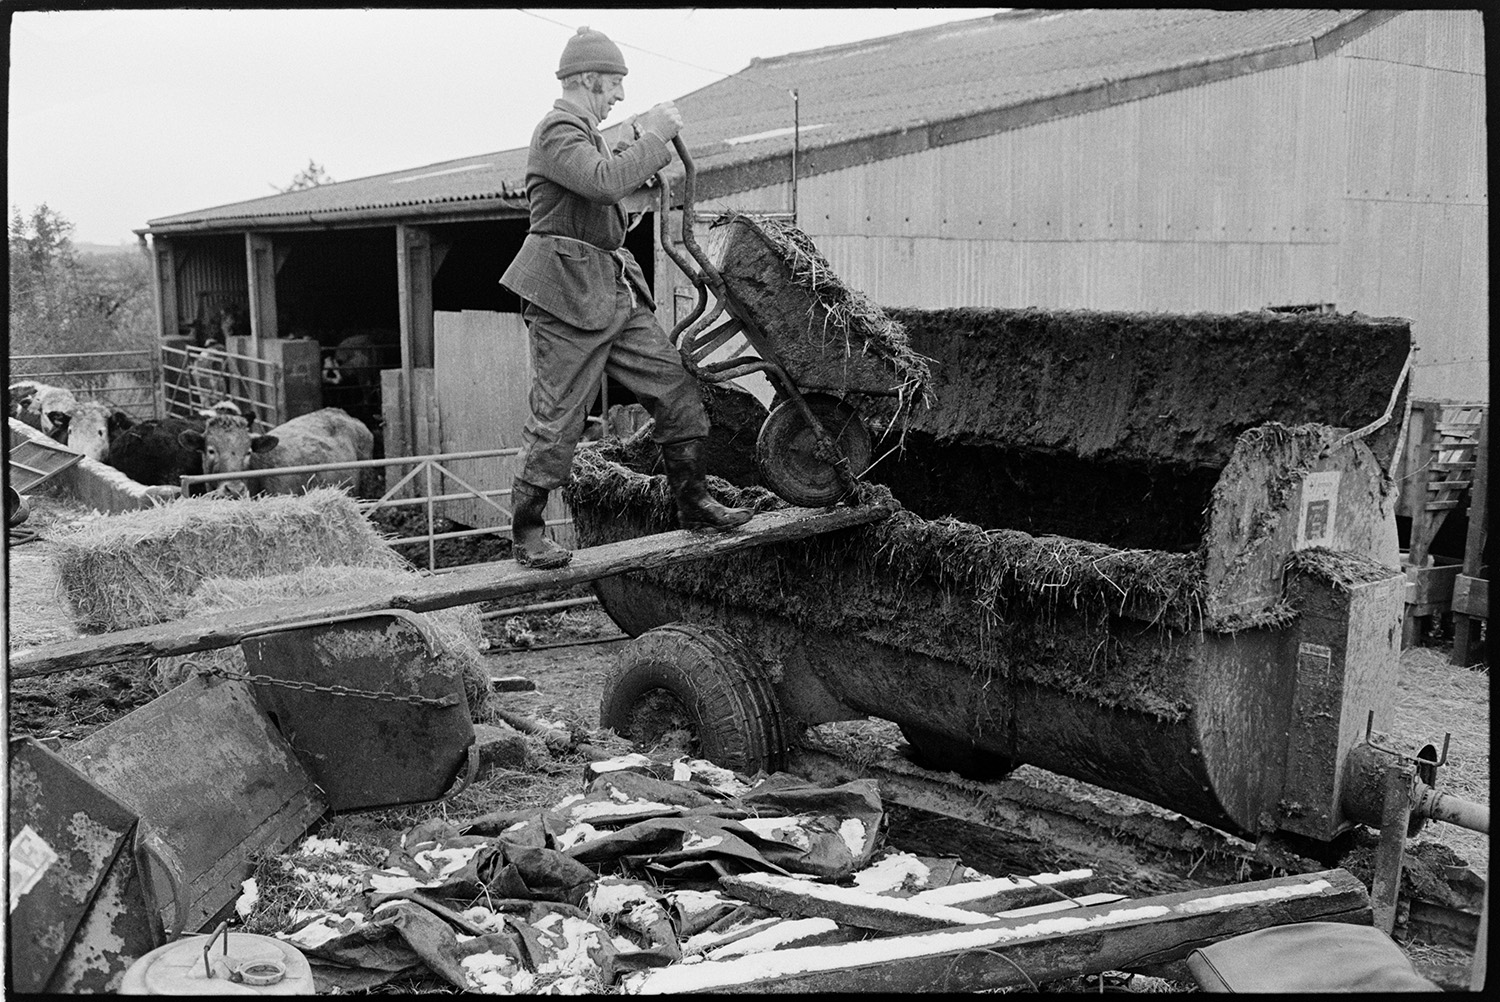 Farmer filling muck spreader with wheelbarrow in farmyard.
[A farmer wheeling a wheelbarrow of dung up a plank to load into a muck spreader in a farmyard at Ingleigh Green. Cattle can be seen by barns in the background.]